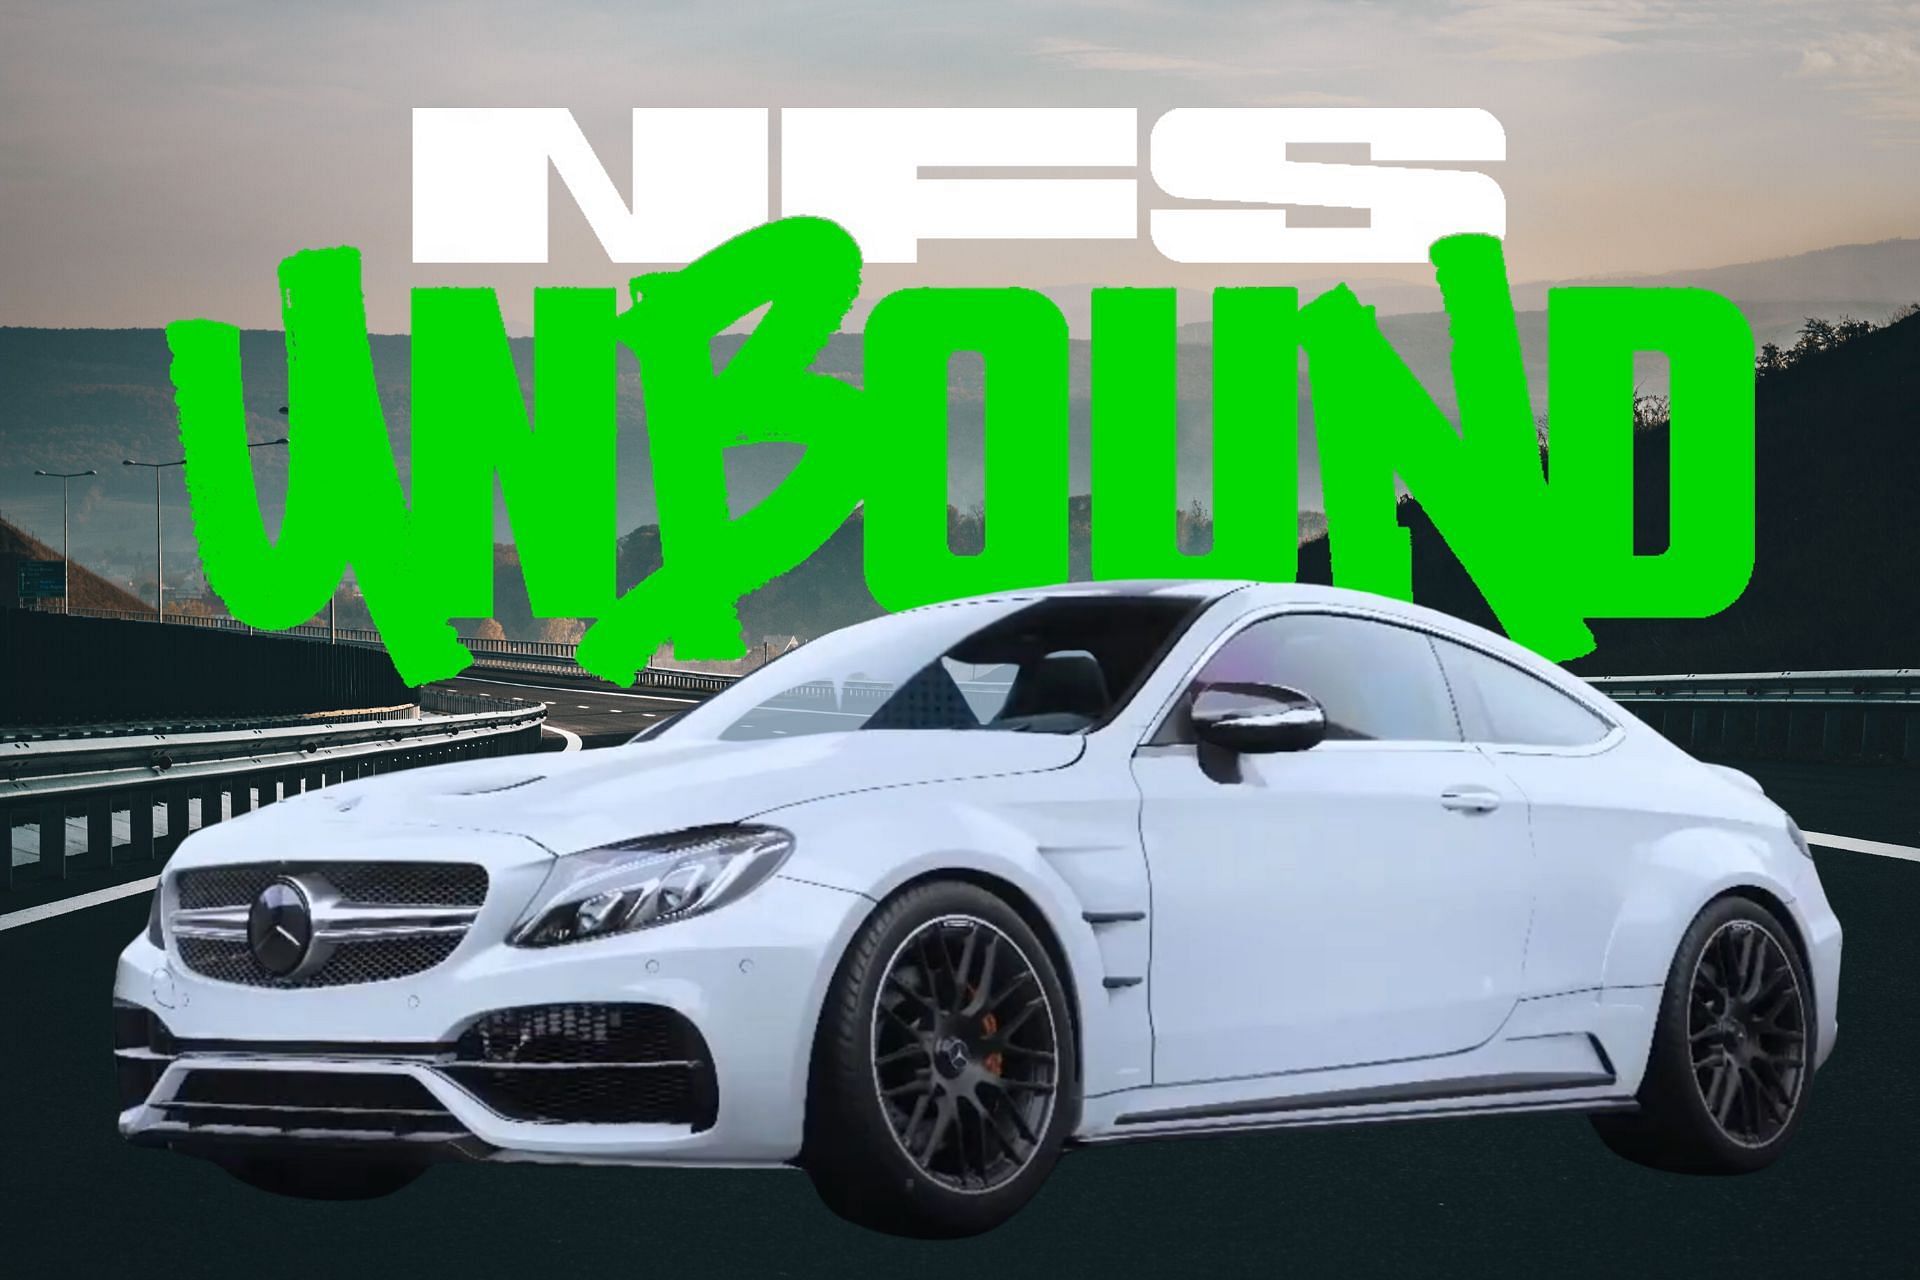 Mercedes-AMG C 63 Coupe 2018 in Need for Speed Unbound (Image via Sportskeeda)